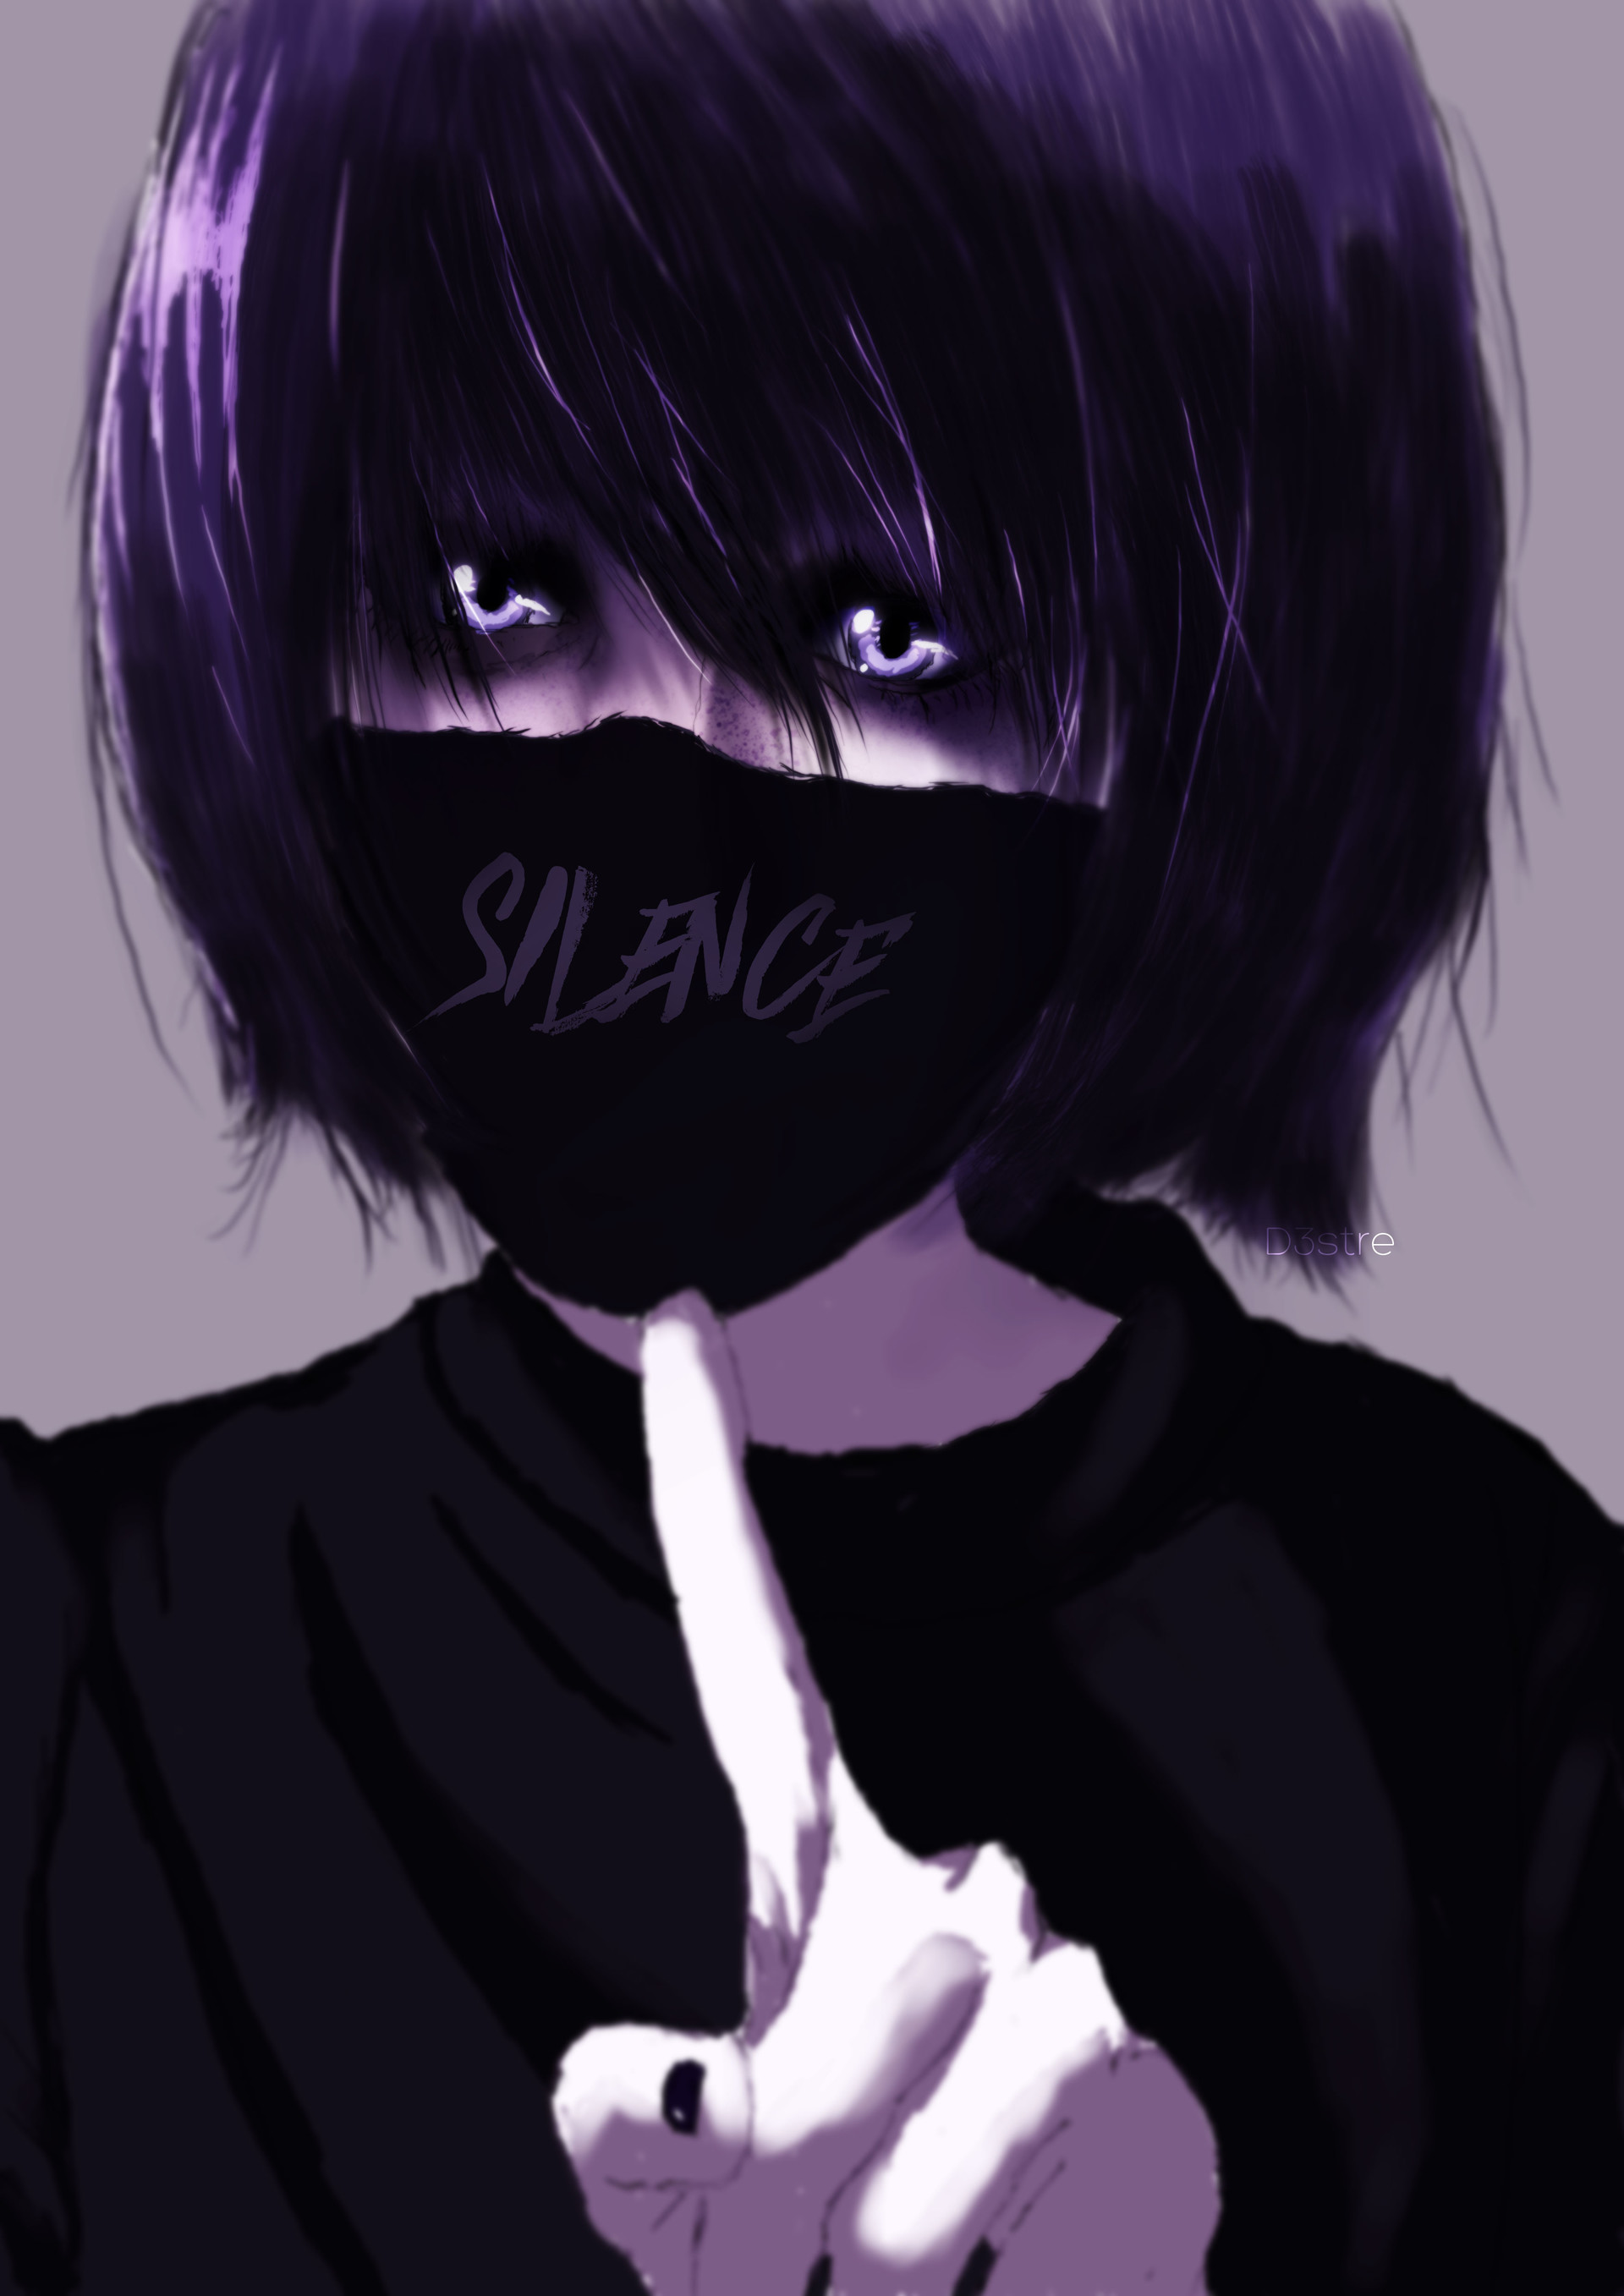 mask, silence, art, person, human, gesture wallpaper for mobile